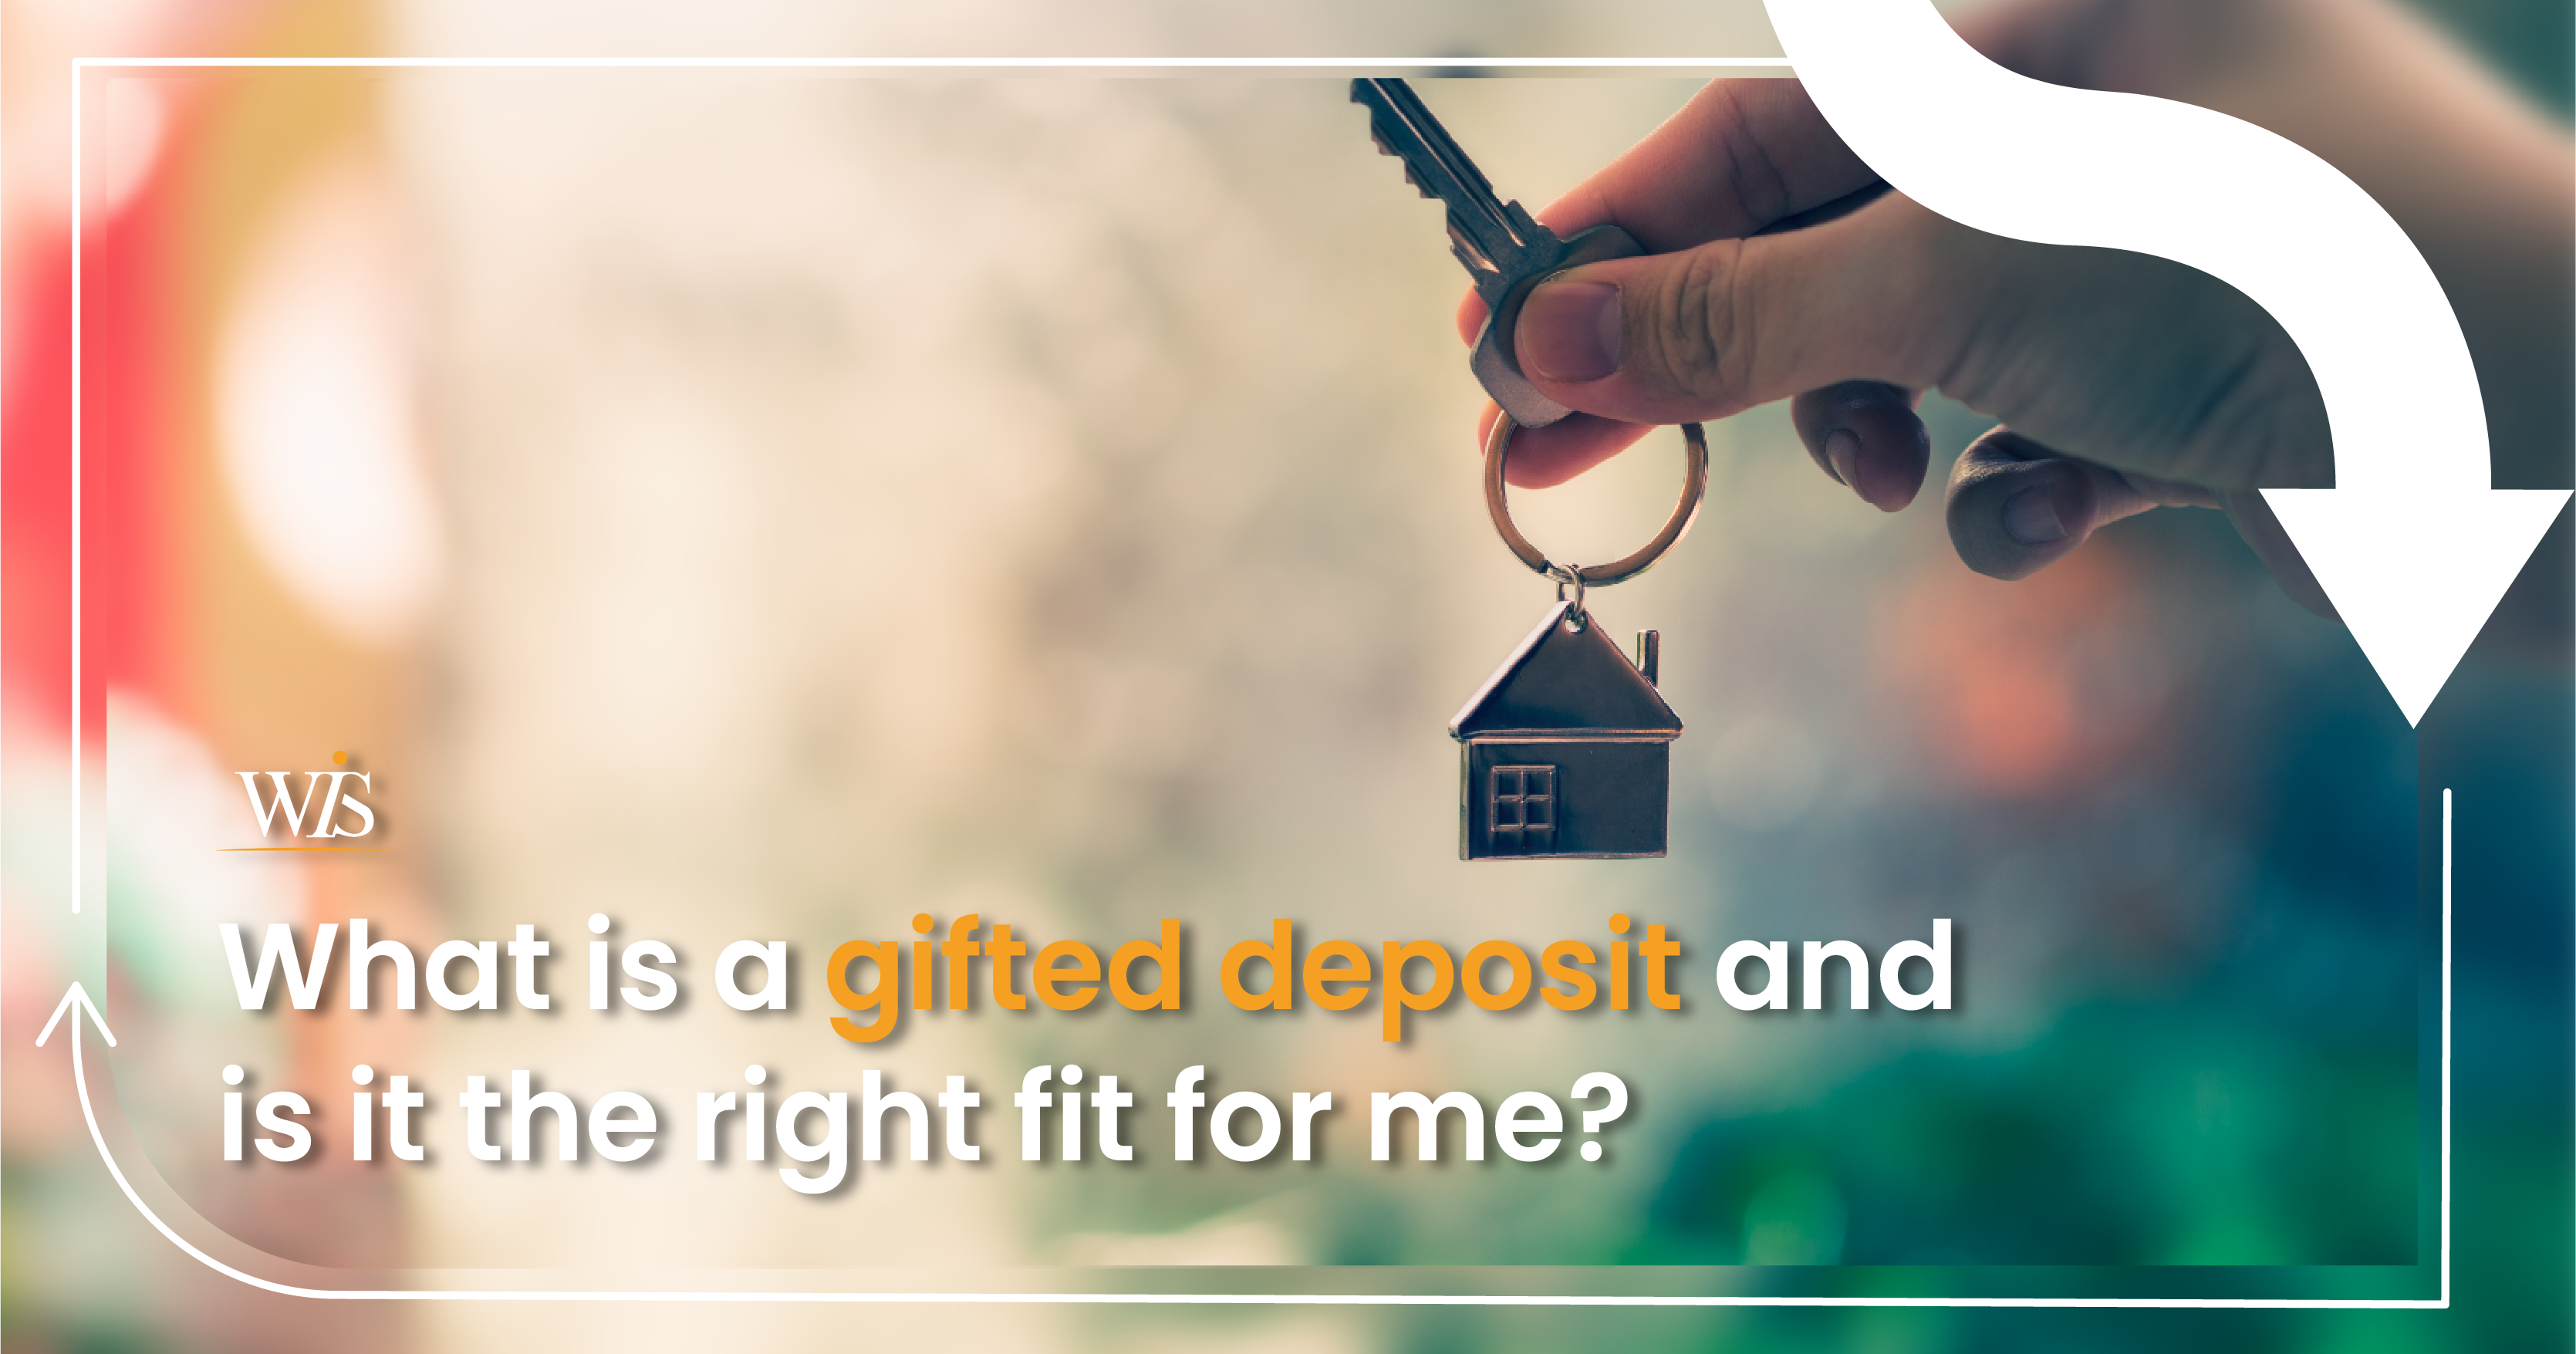 What is a gifted deposit and is it the right fit for me? image